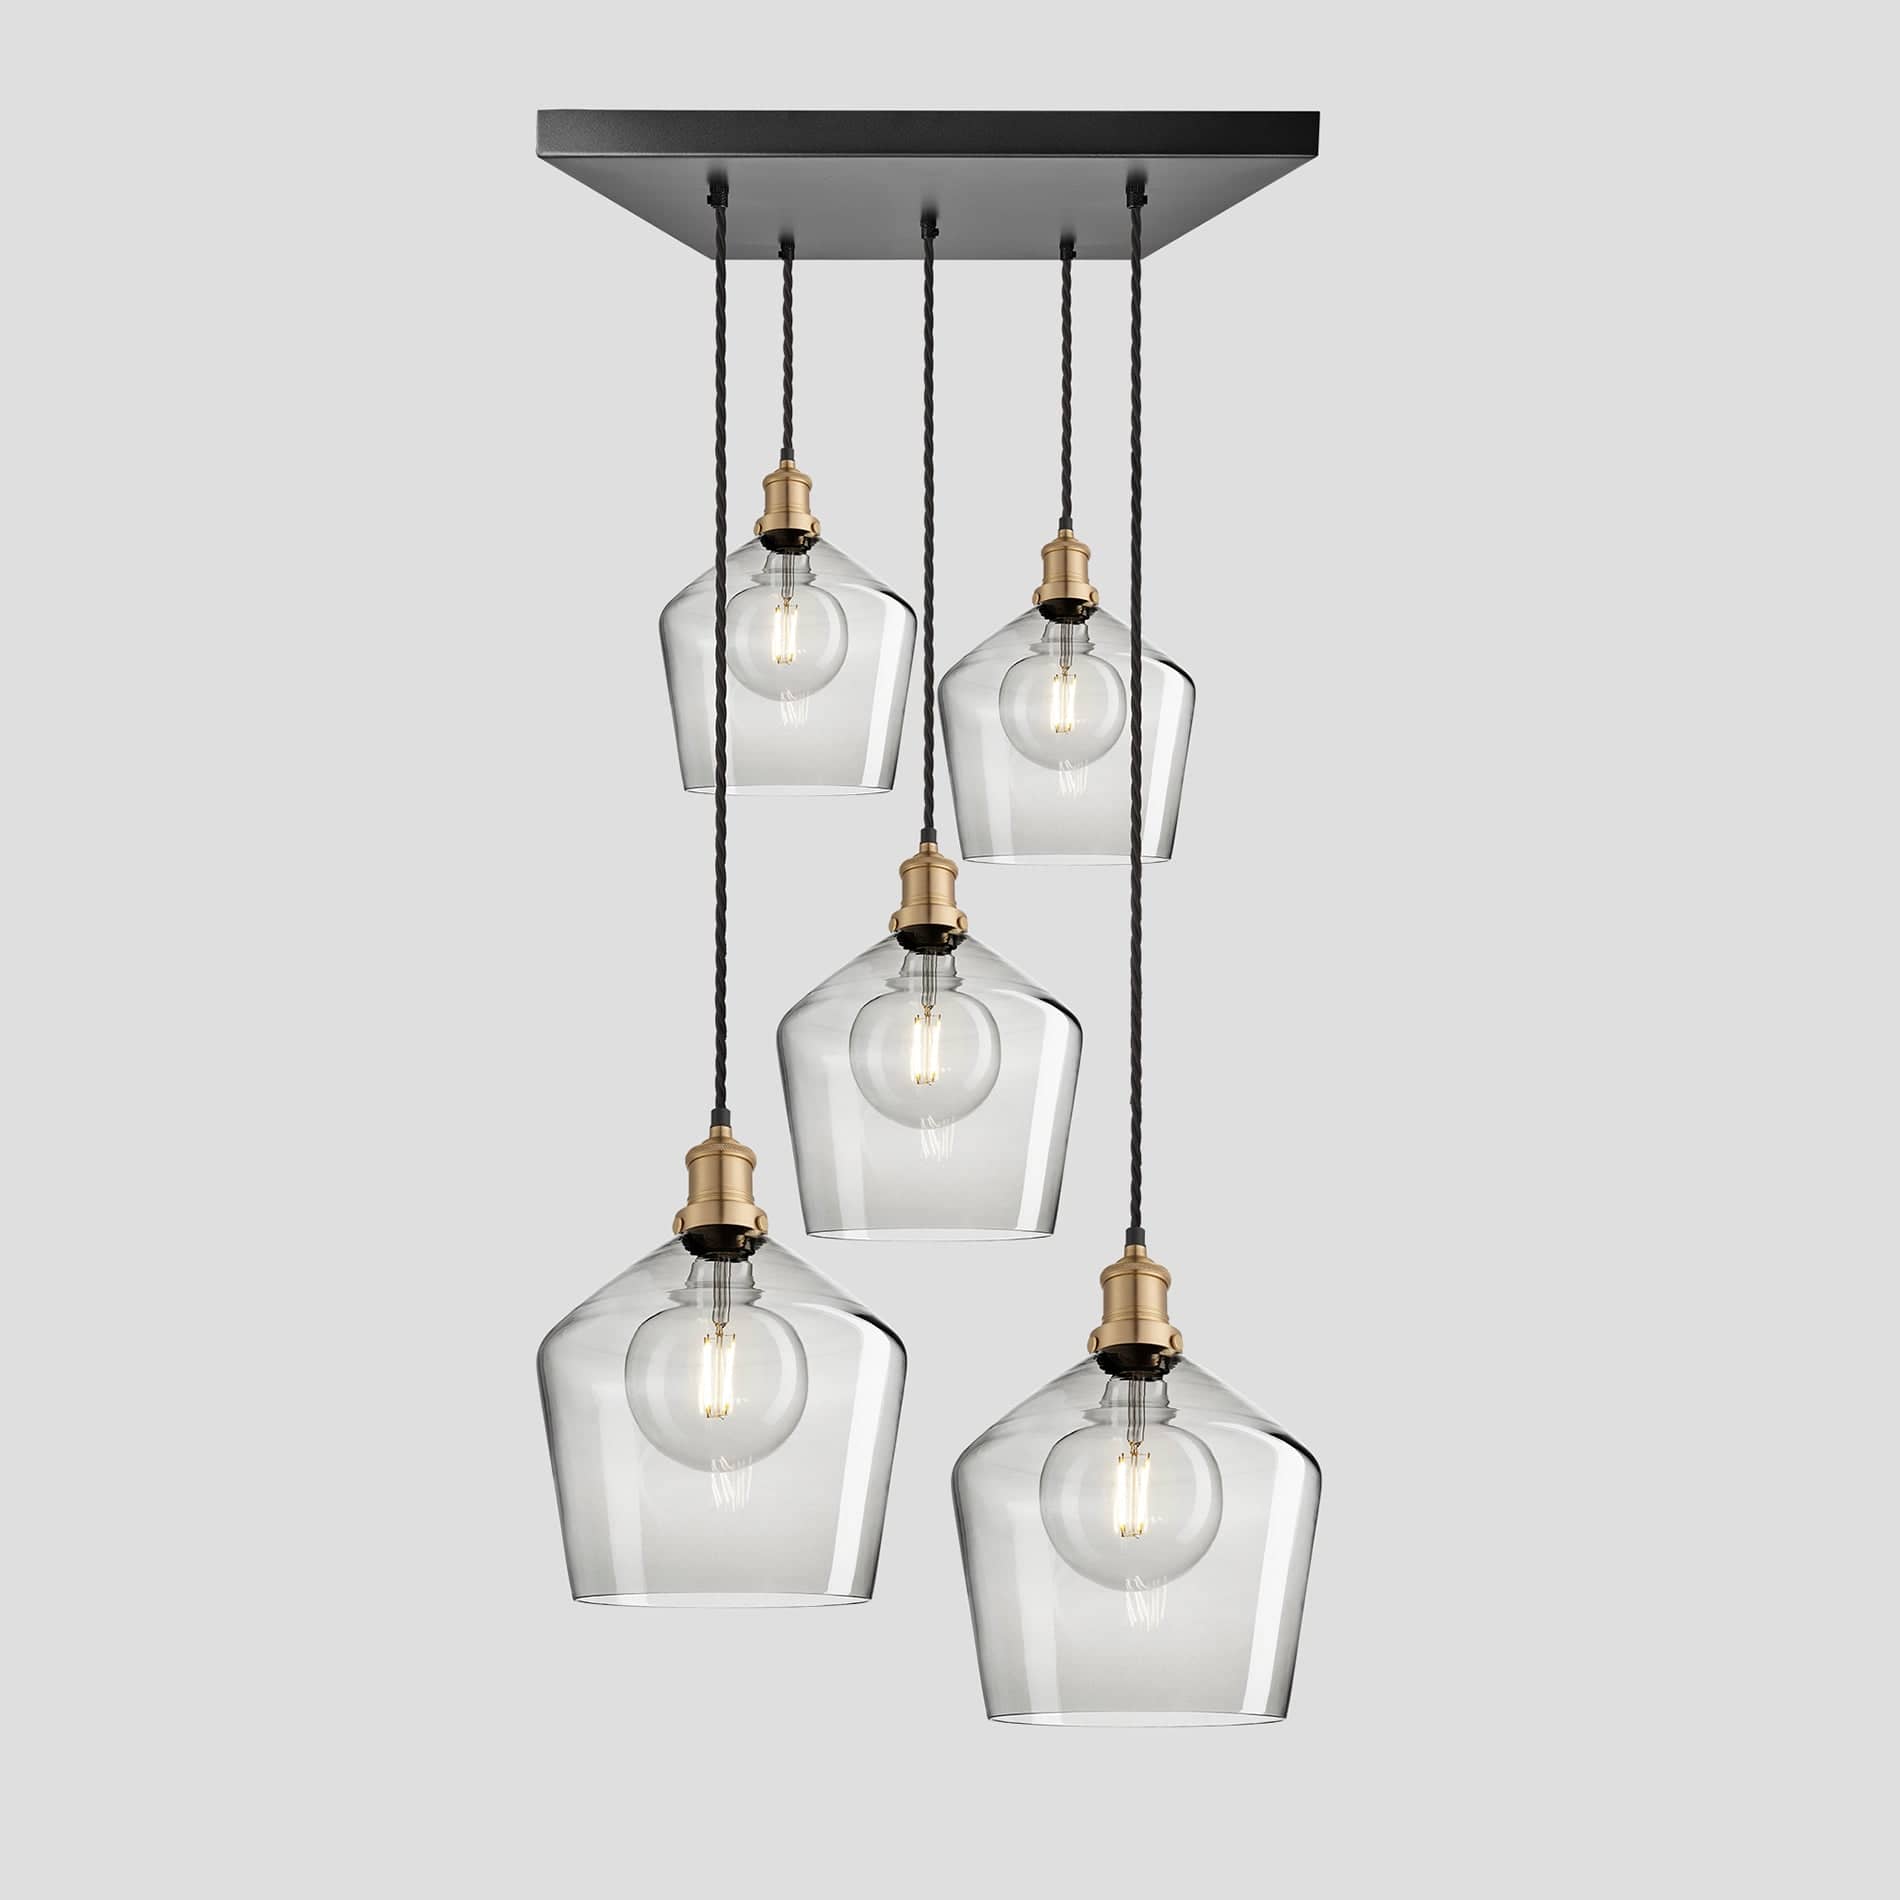 Brooklyn Tinted Glass Schoolhouse 5 Wire Square Cluster Lights - 10 inch - Smoke Grey Industville BR-TGL-SH10-5WSQCL-SG-BH